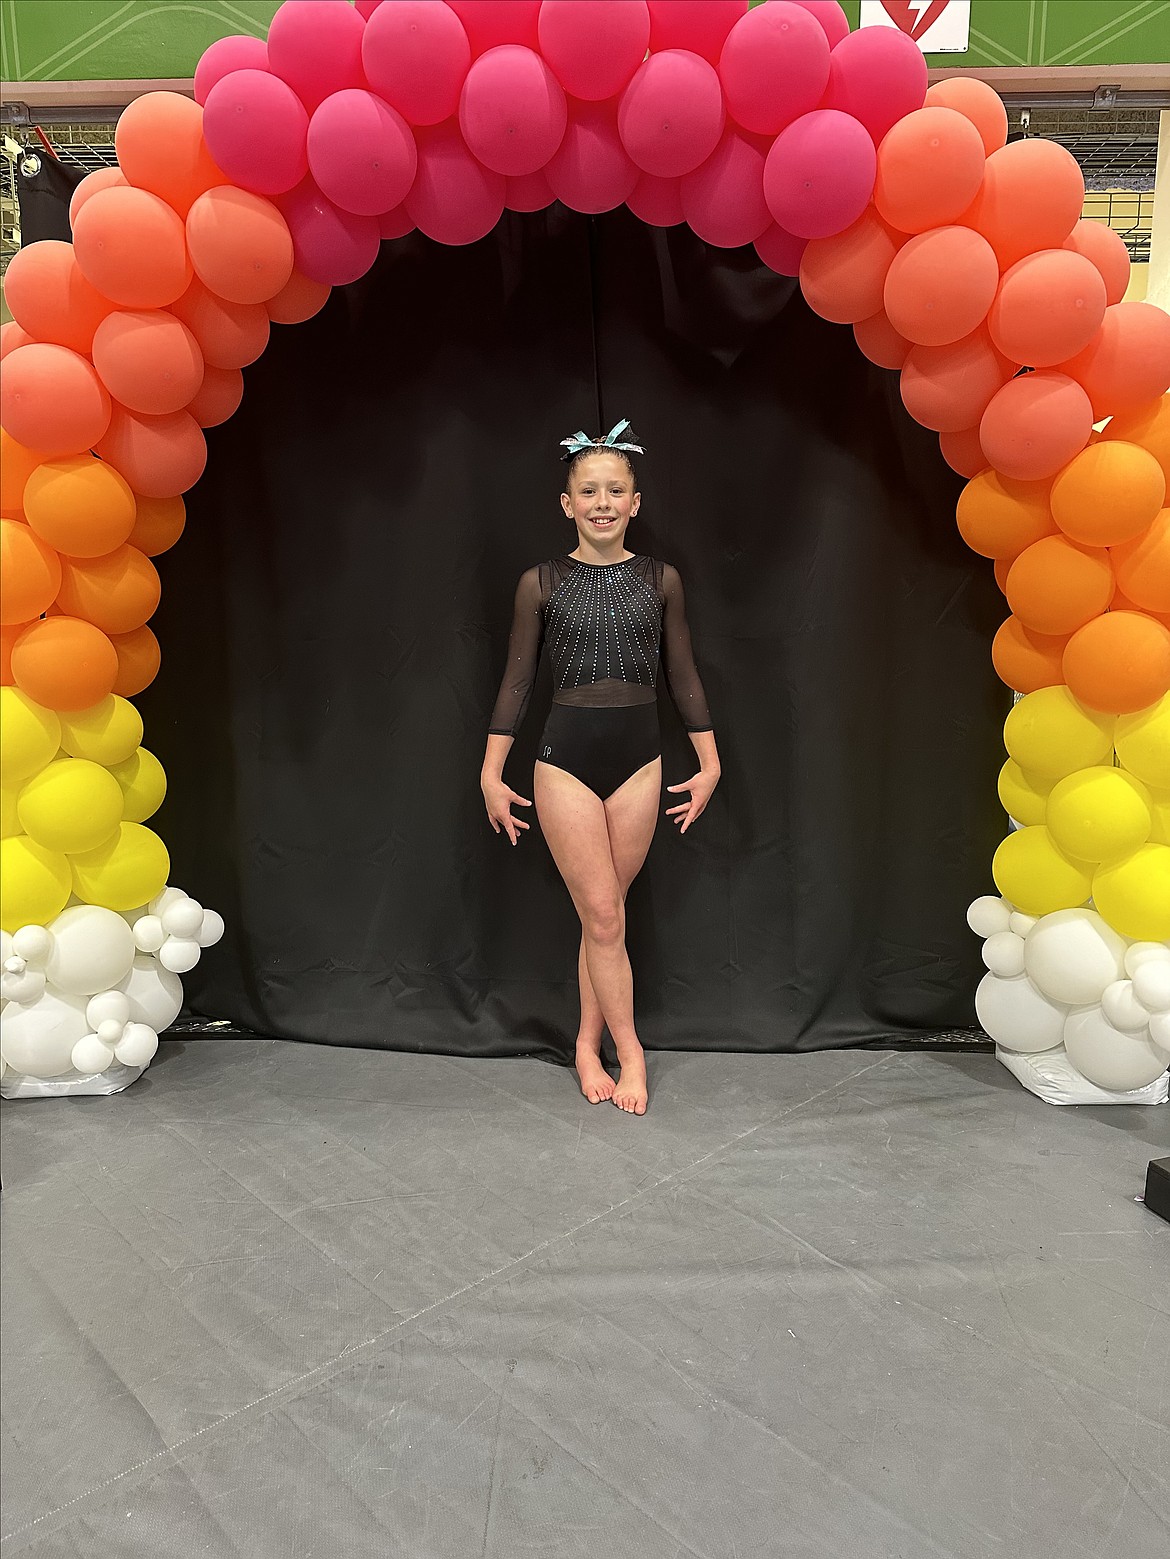 Courtesy photo
Avant Coeur Gymnastics Level 7 Summer Nelson competed at the Region 2 regional championships in Anchorage, Alaska.